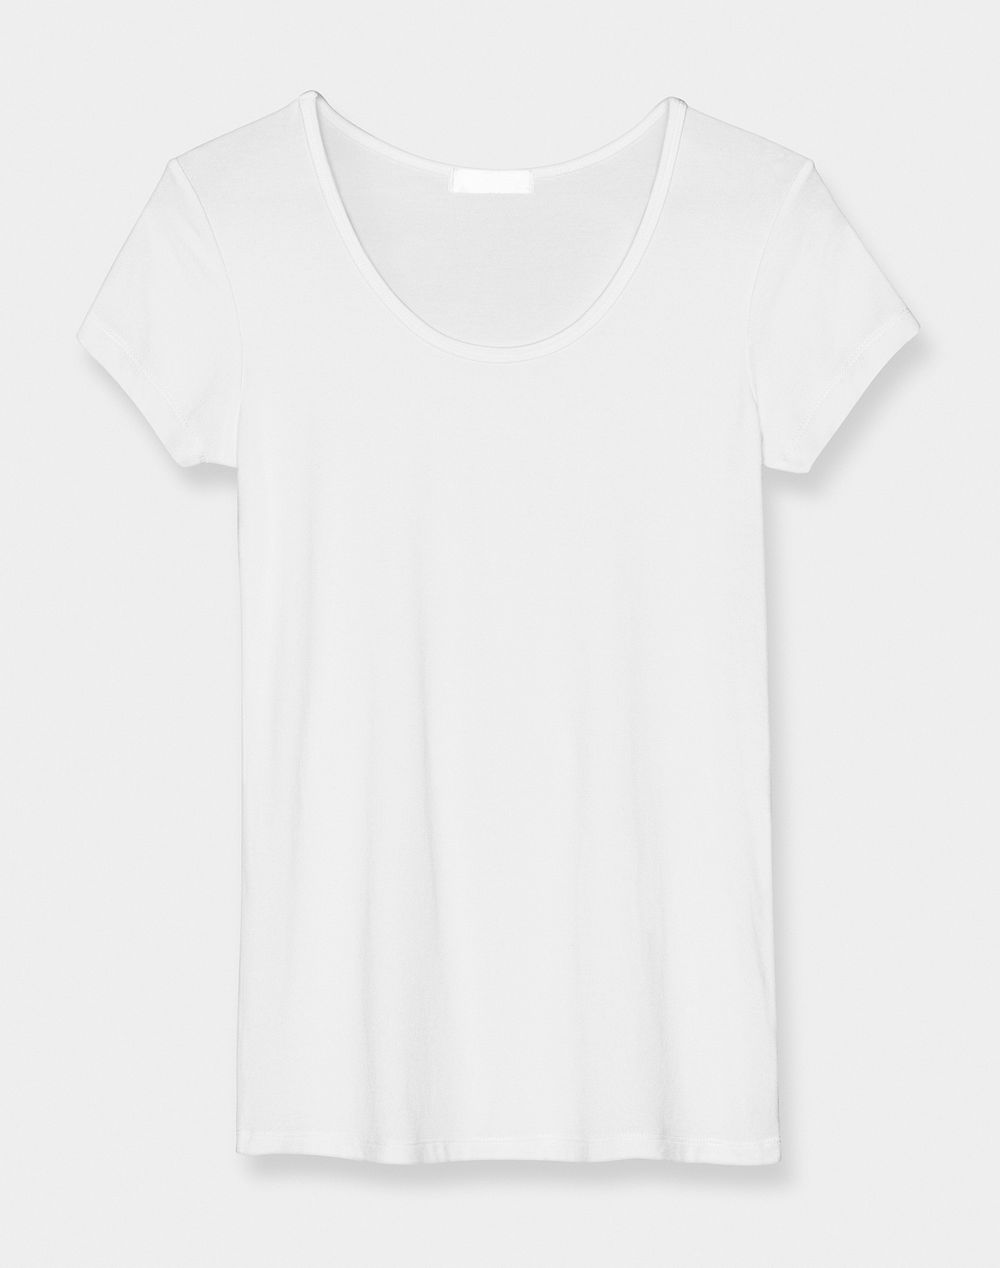 Basic white scoop neck tee women&rsquo;s apparel front view